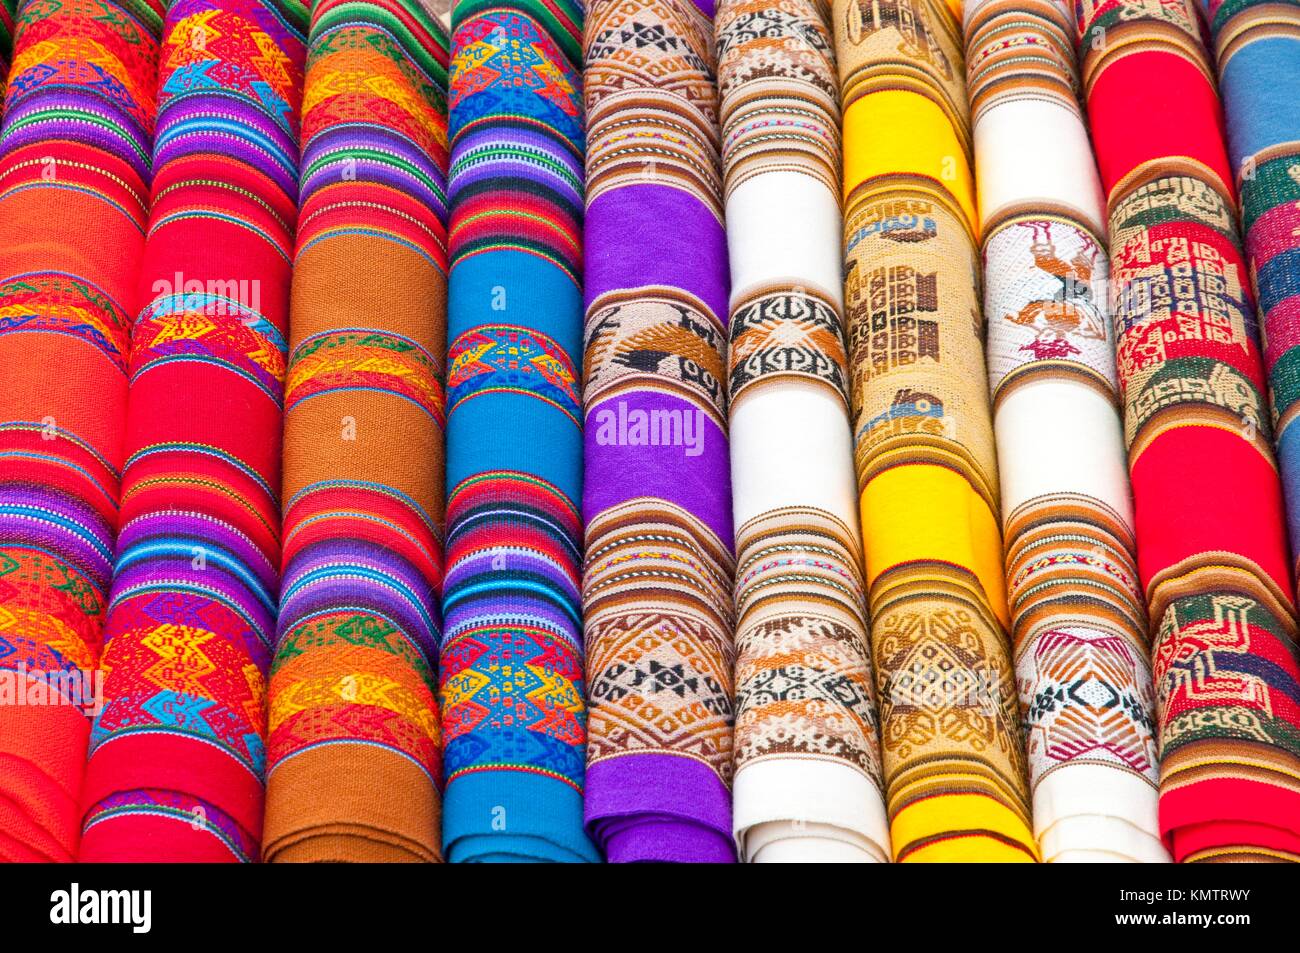 Closeup of traditional woven goods and textiles in the roadside markets of rural Peru, South America Stock Photo